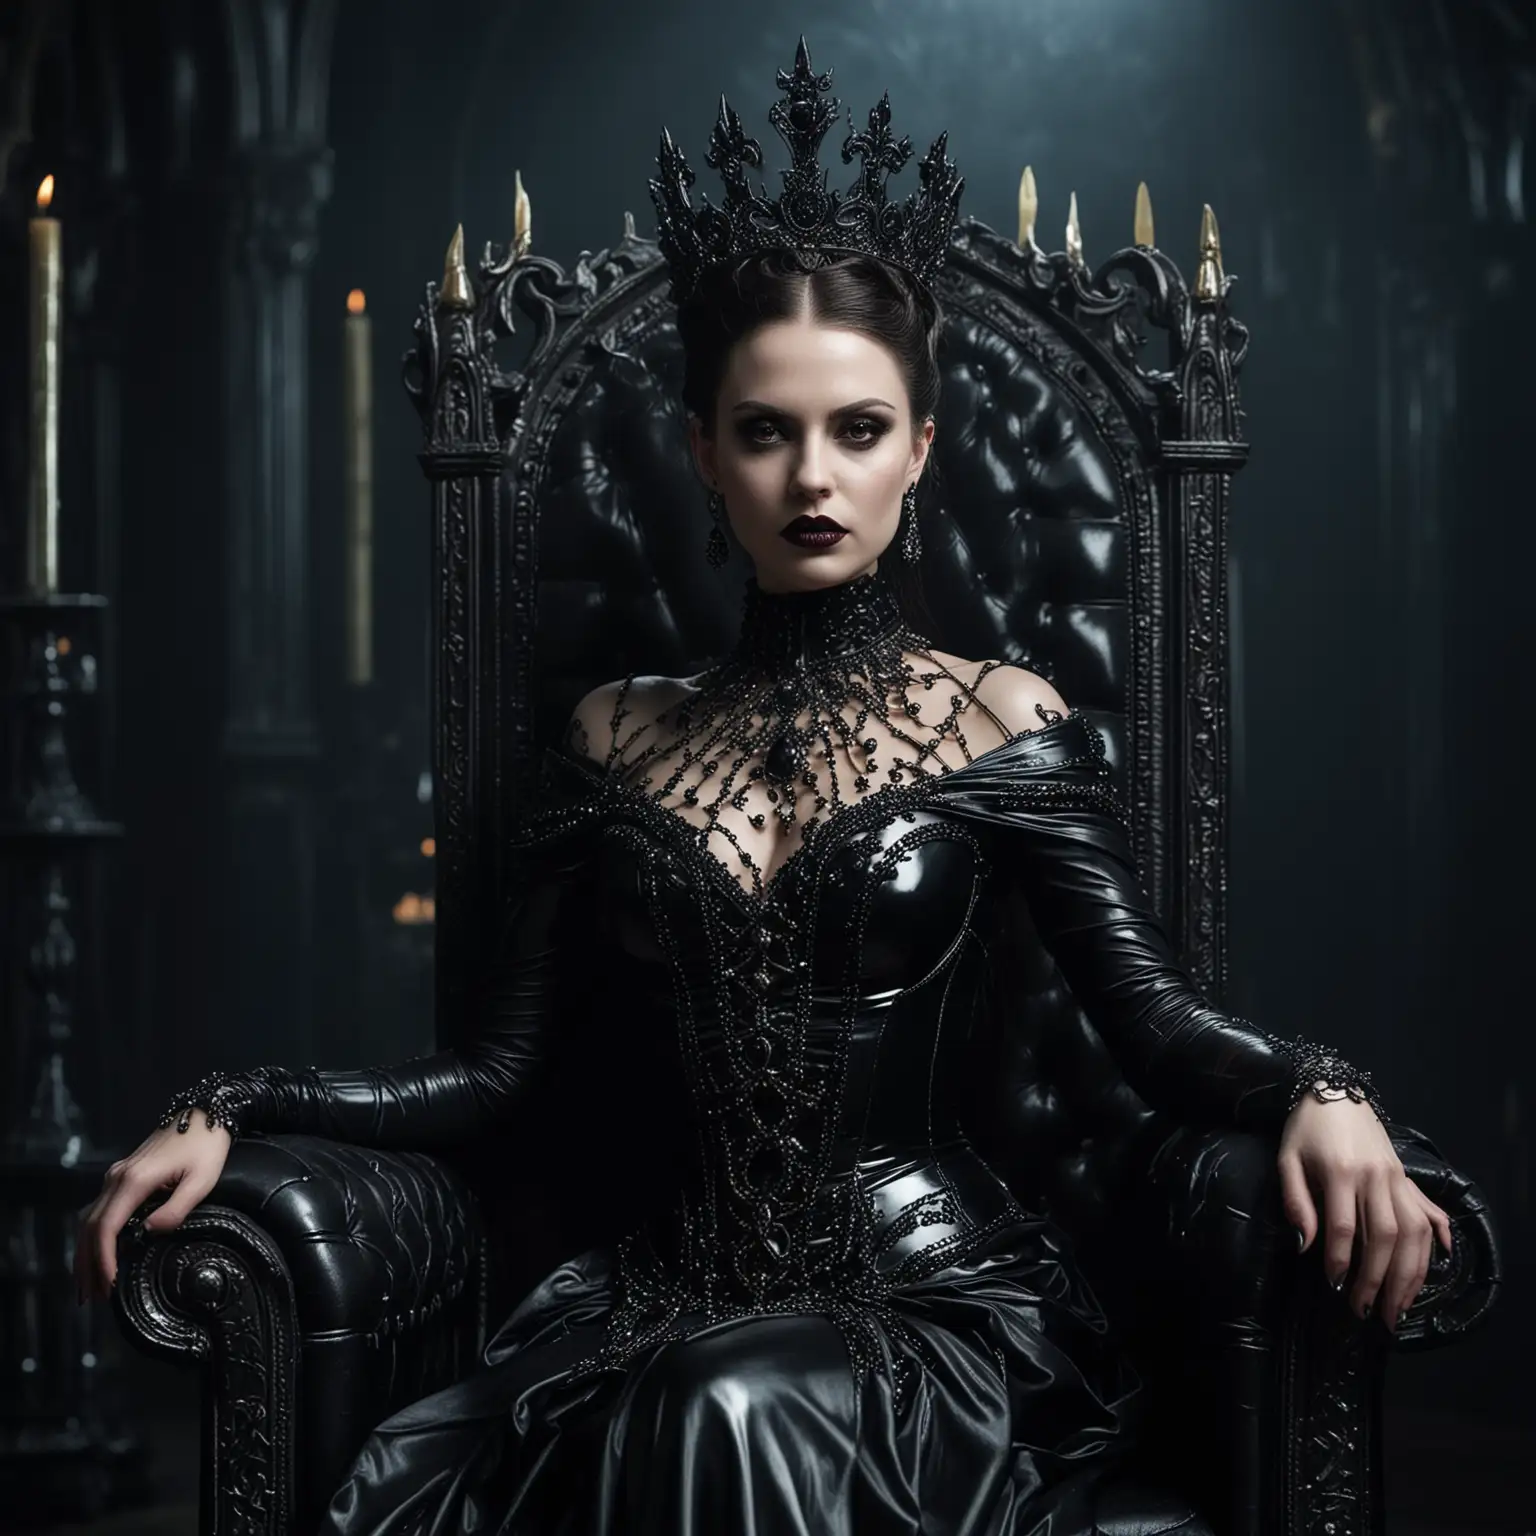 Regal Dark Queen in Royal Black Latex Dress with Sinister Sovereignty